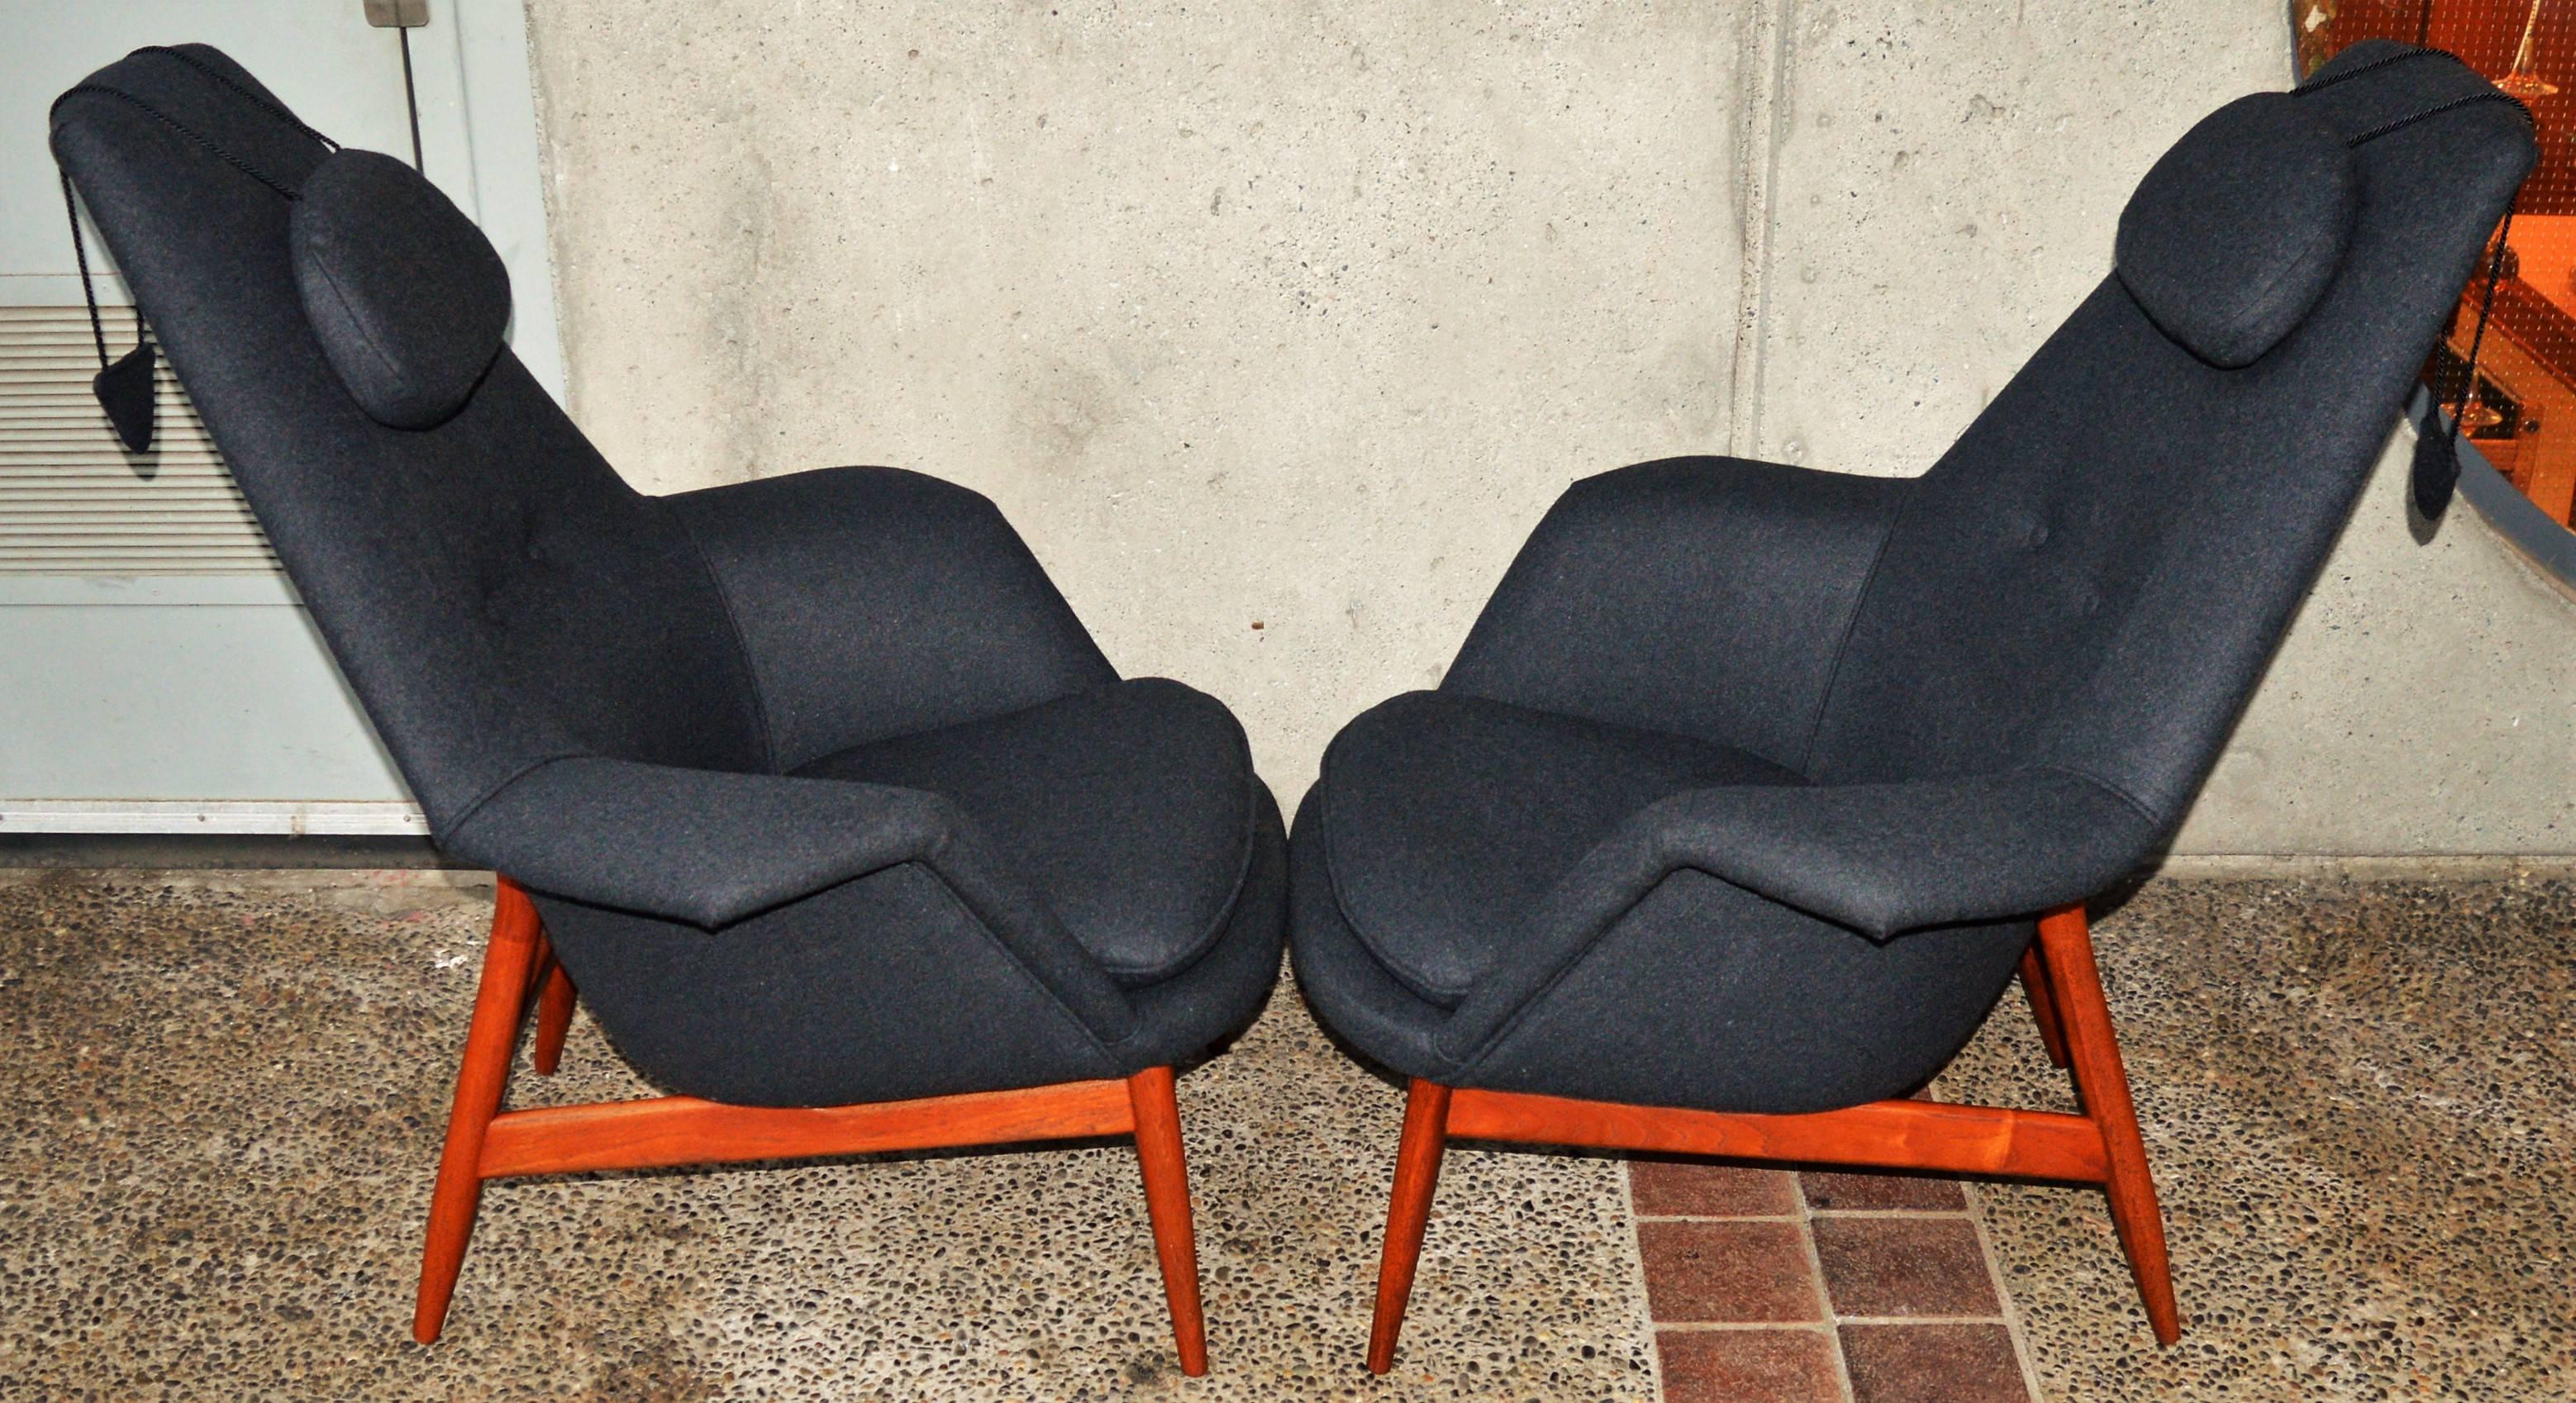 Mid-20th Century Pair of Teak Manta Ray Chairs in Charcoal Wool by Bjorn Engo for DUX